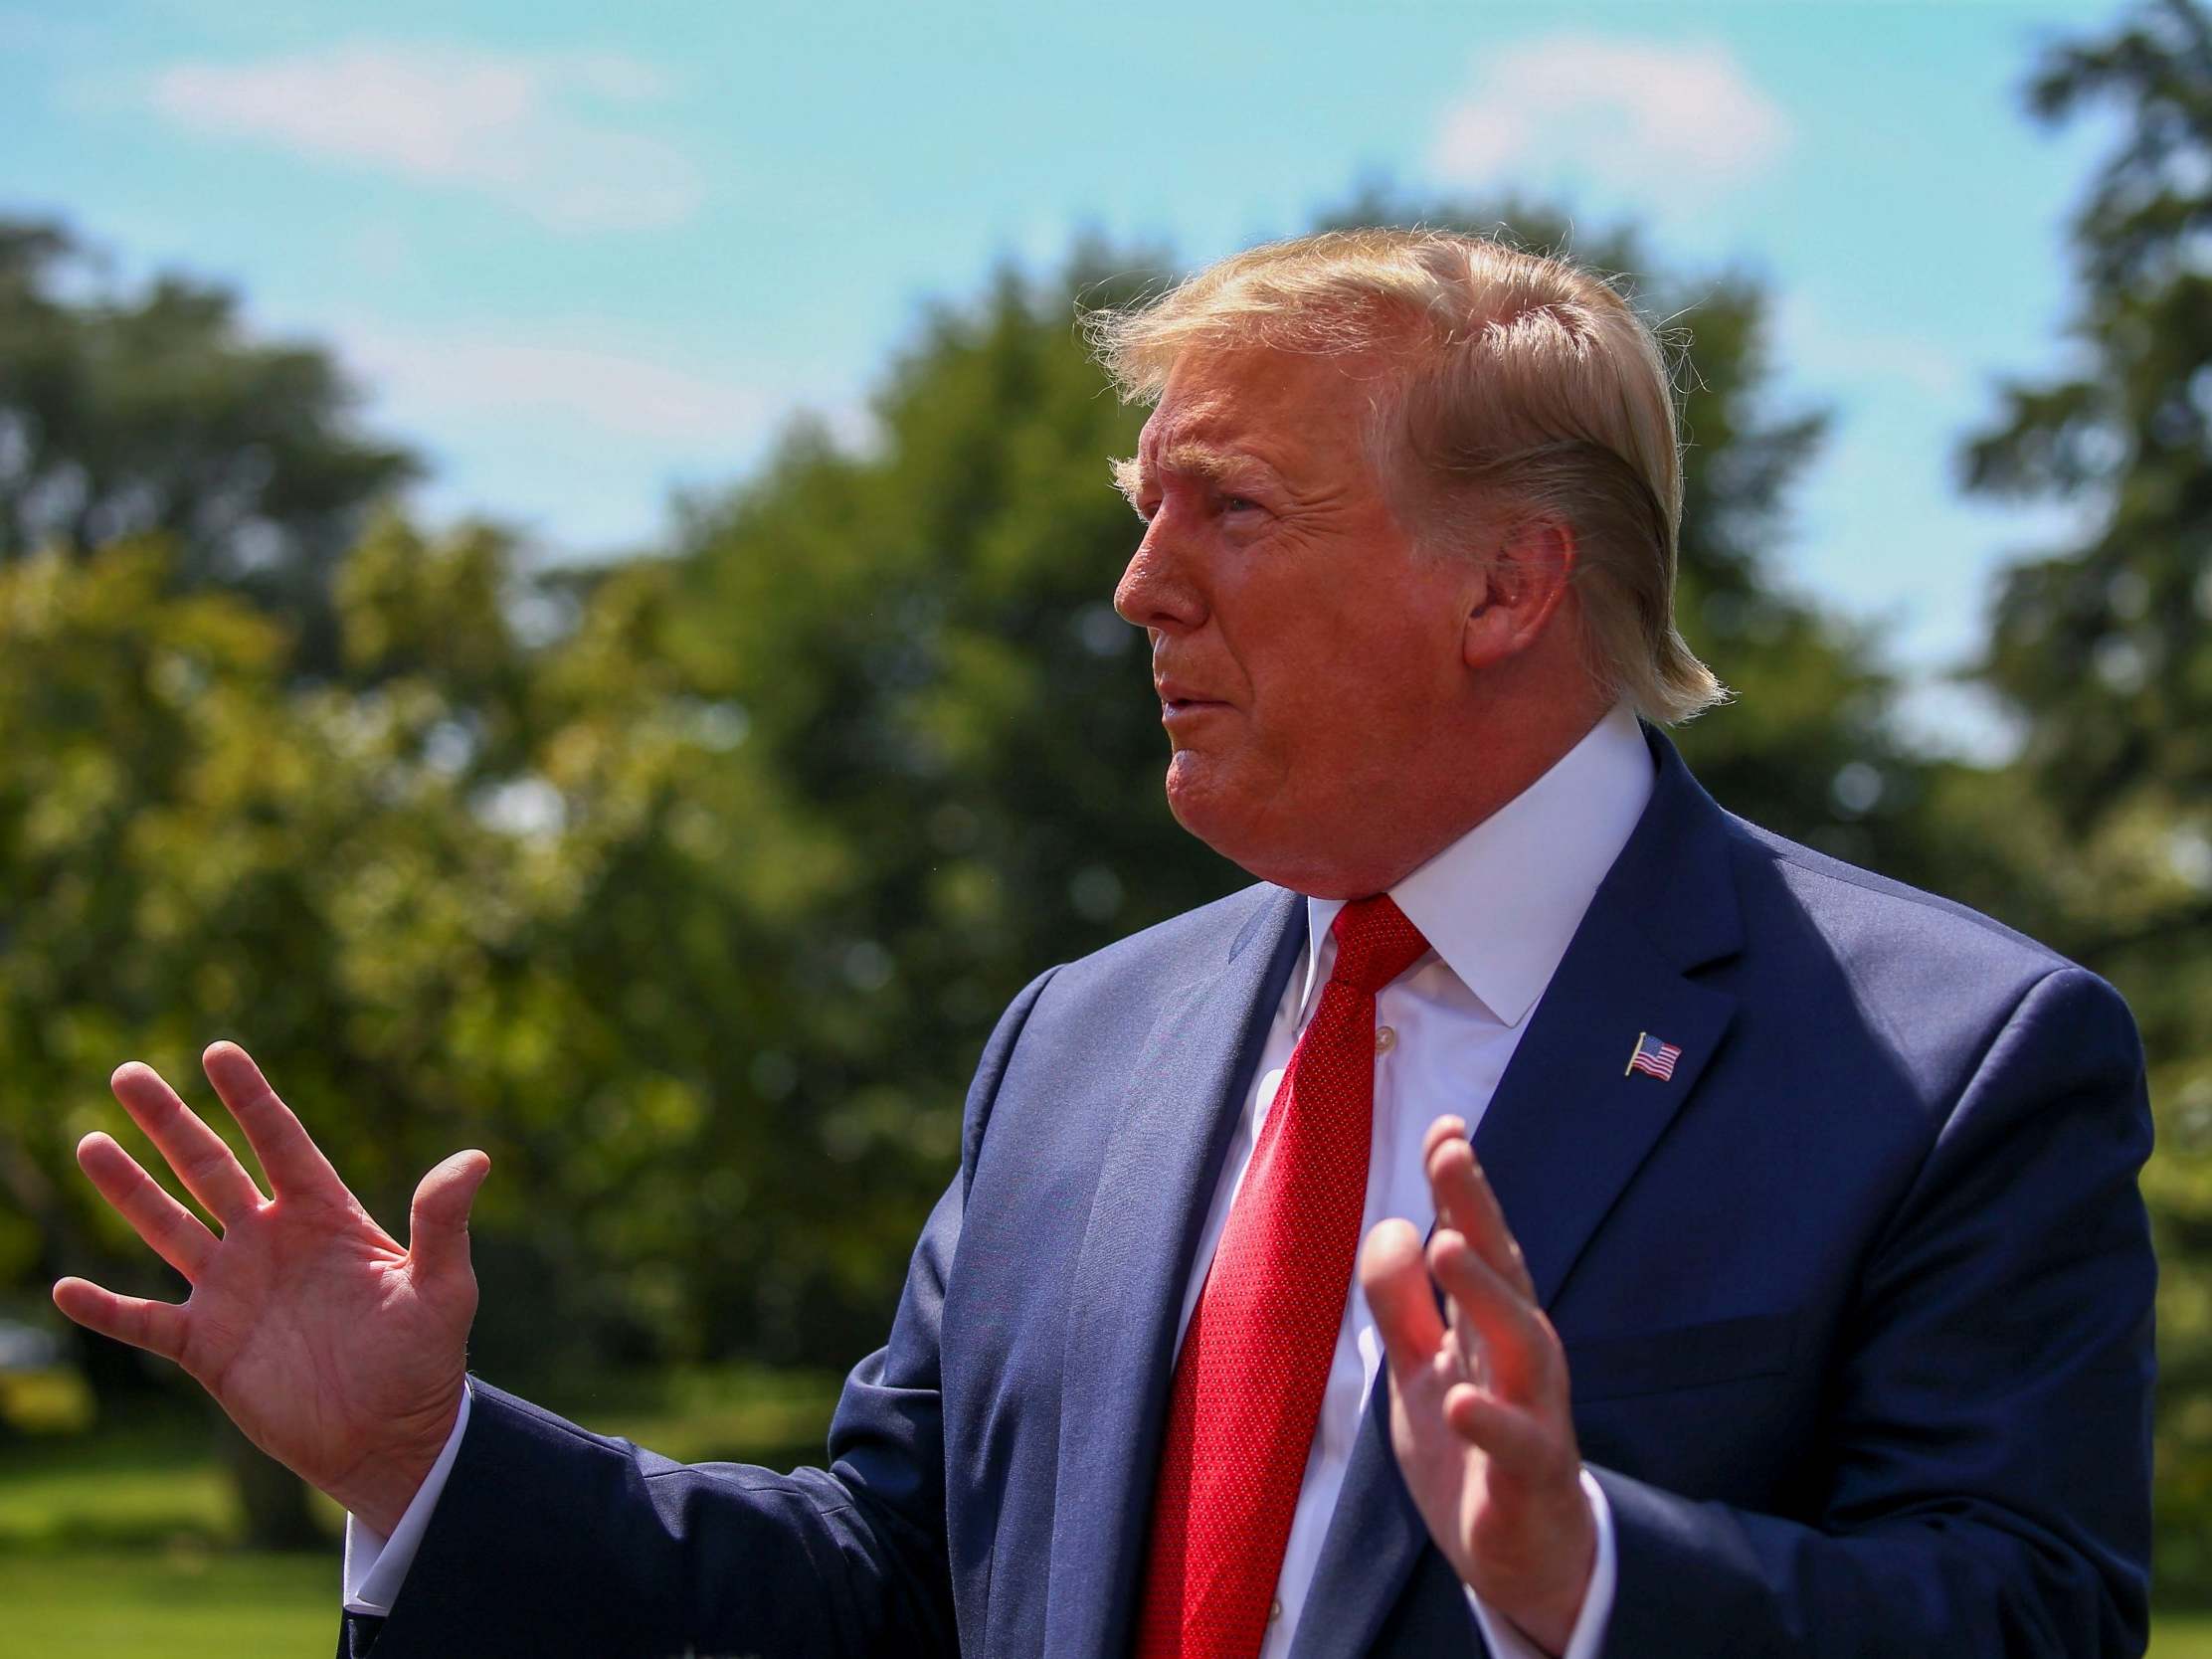 Trump says 'I am the chosen one' in tirade over looming recession and China trade war